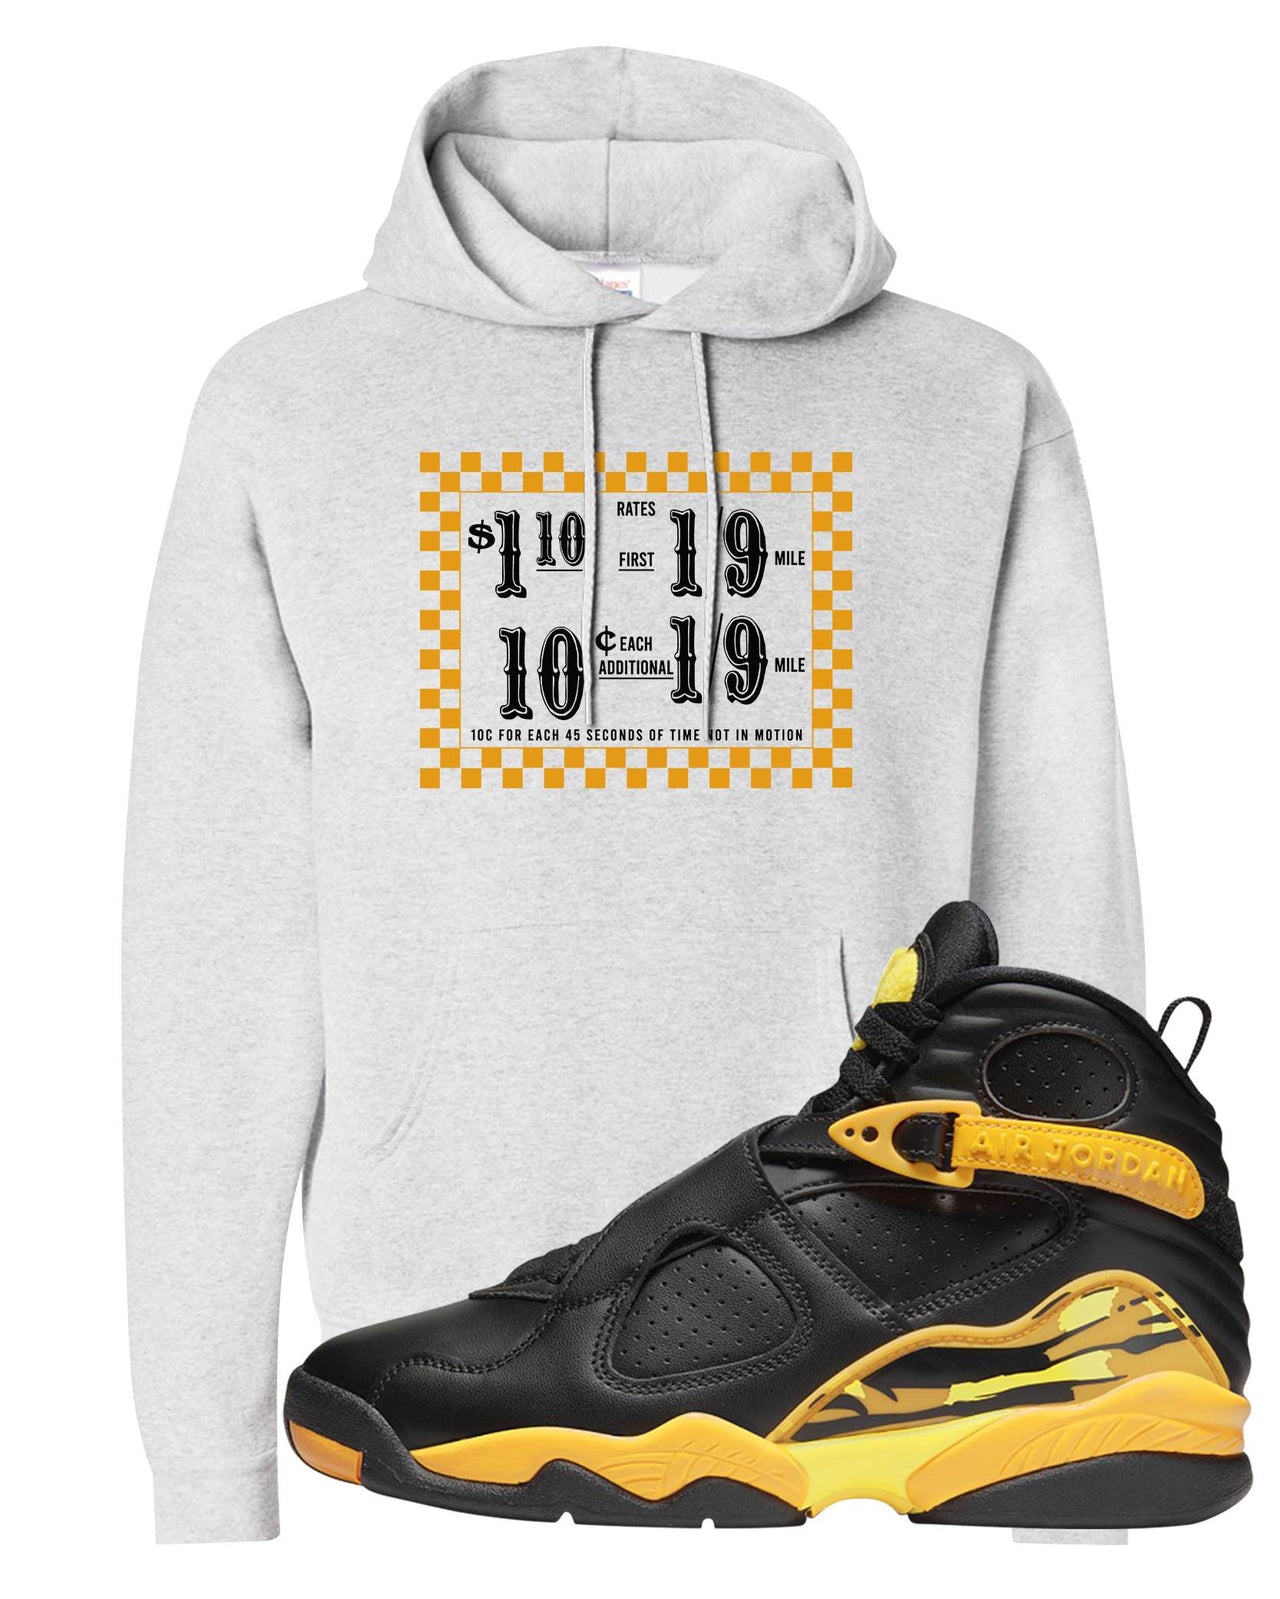 Taxi 8s Hoodie | Taxi Fare Ticket, Ash